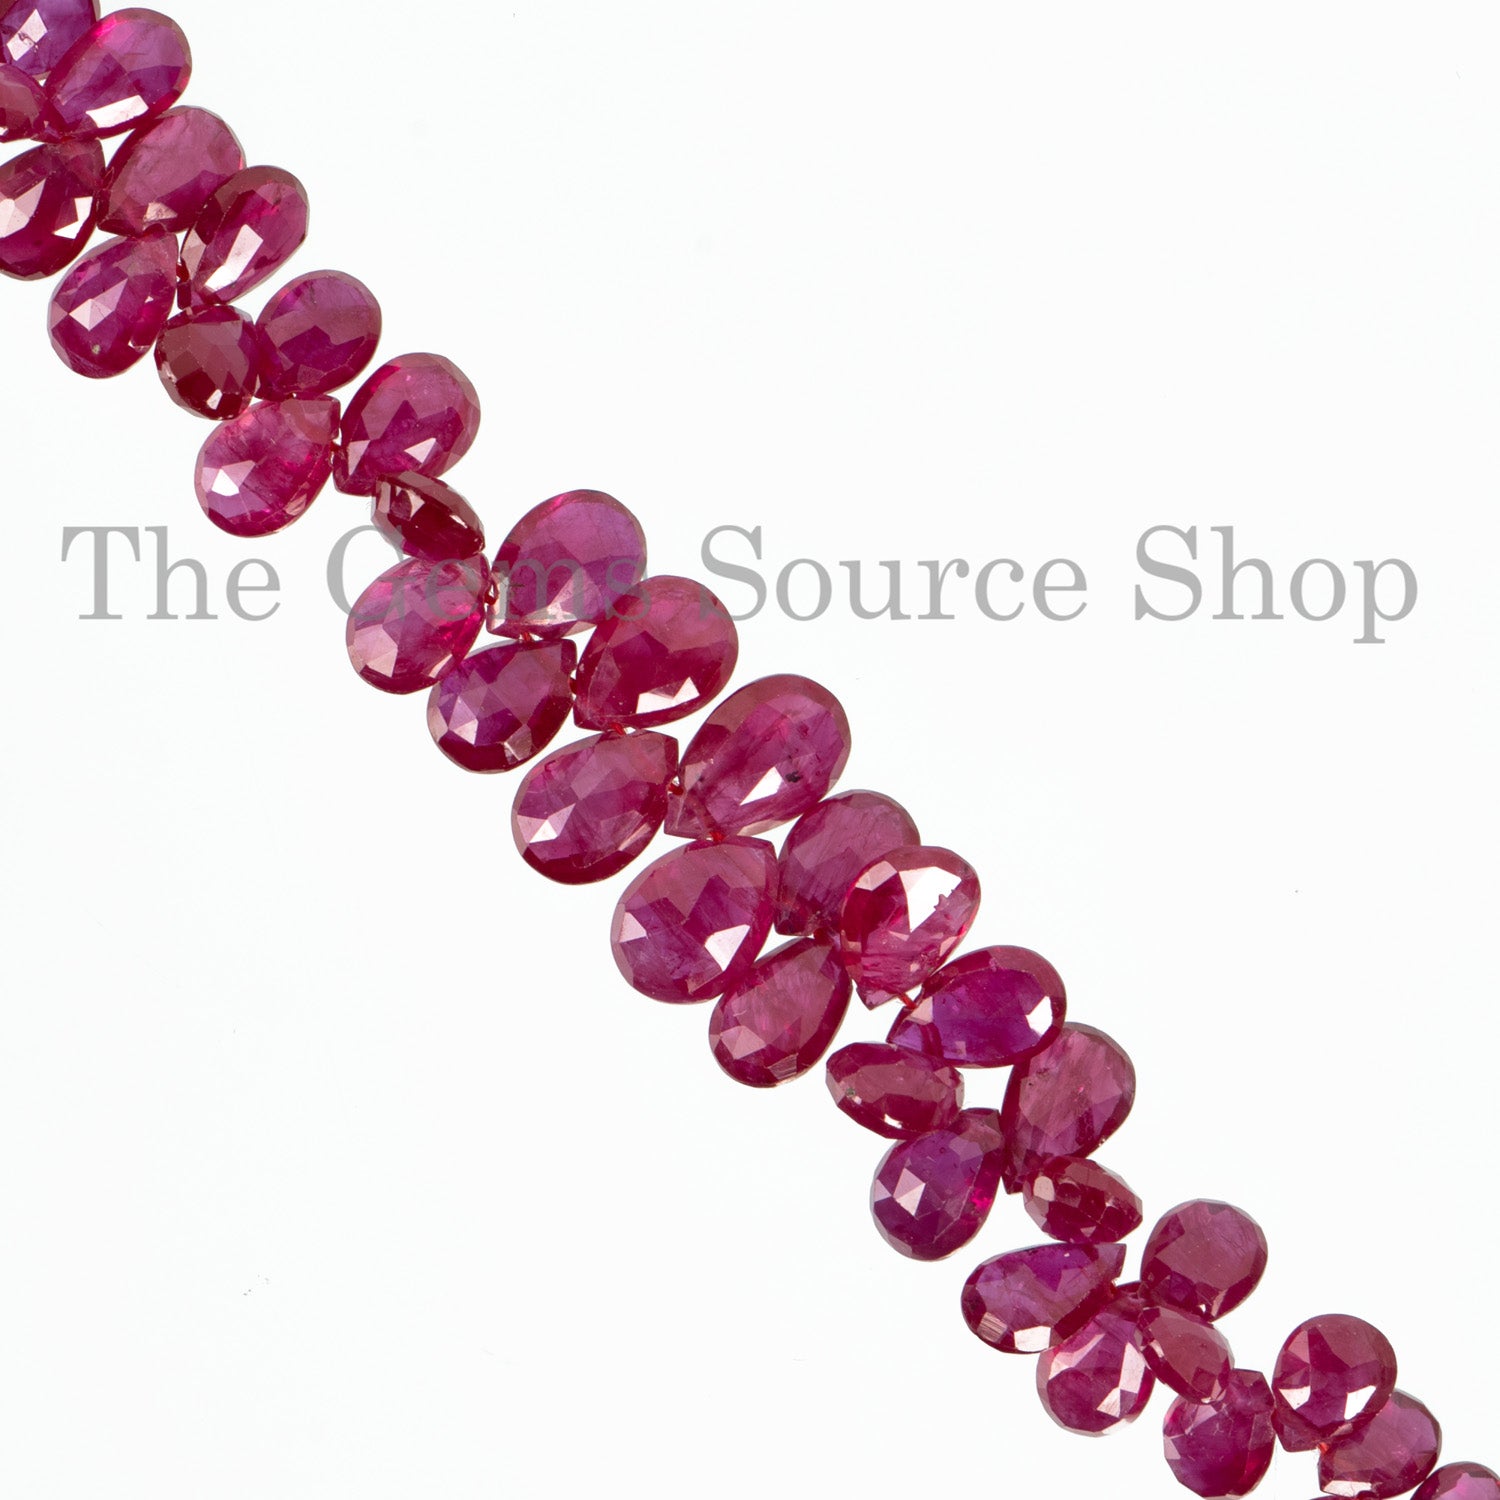 Natural Rare Burma Ruby Faceted Pear Beads, Super Top Quality Gemstone Beads Briolette